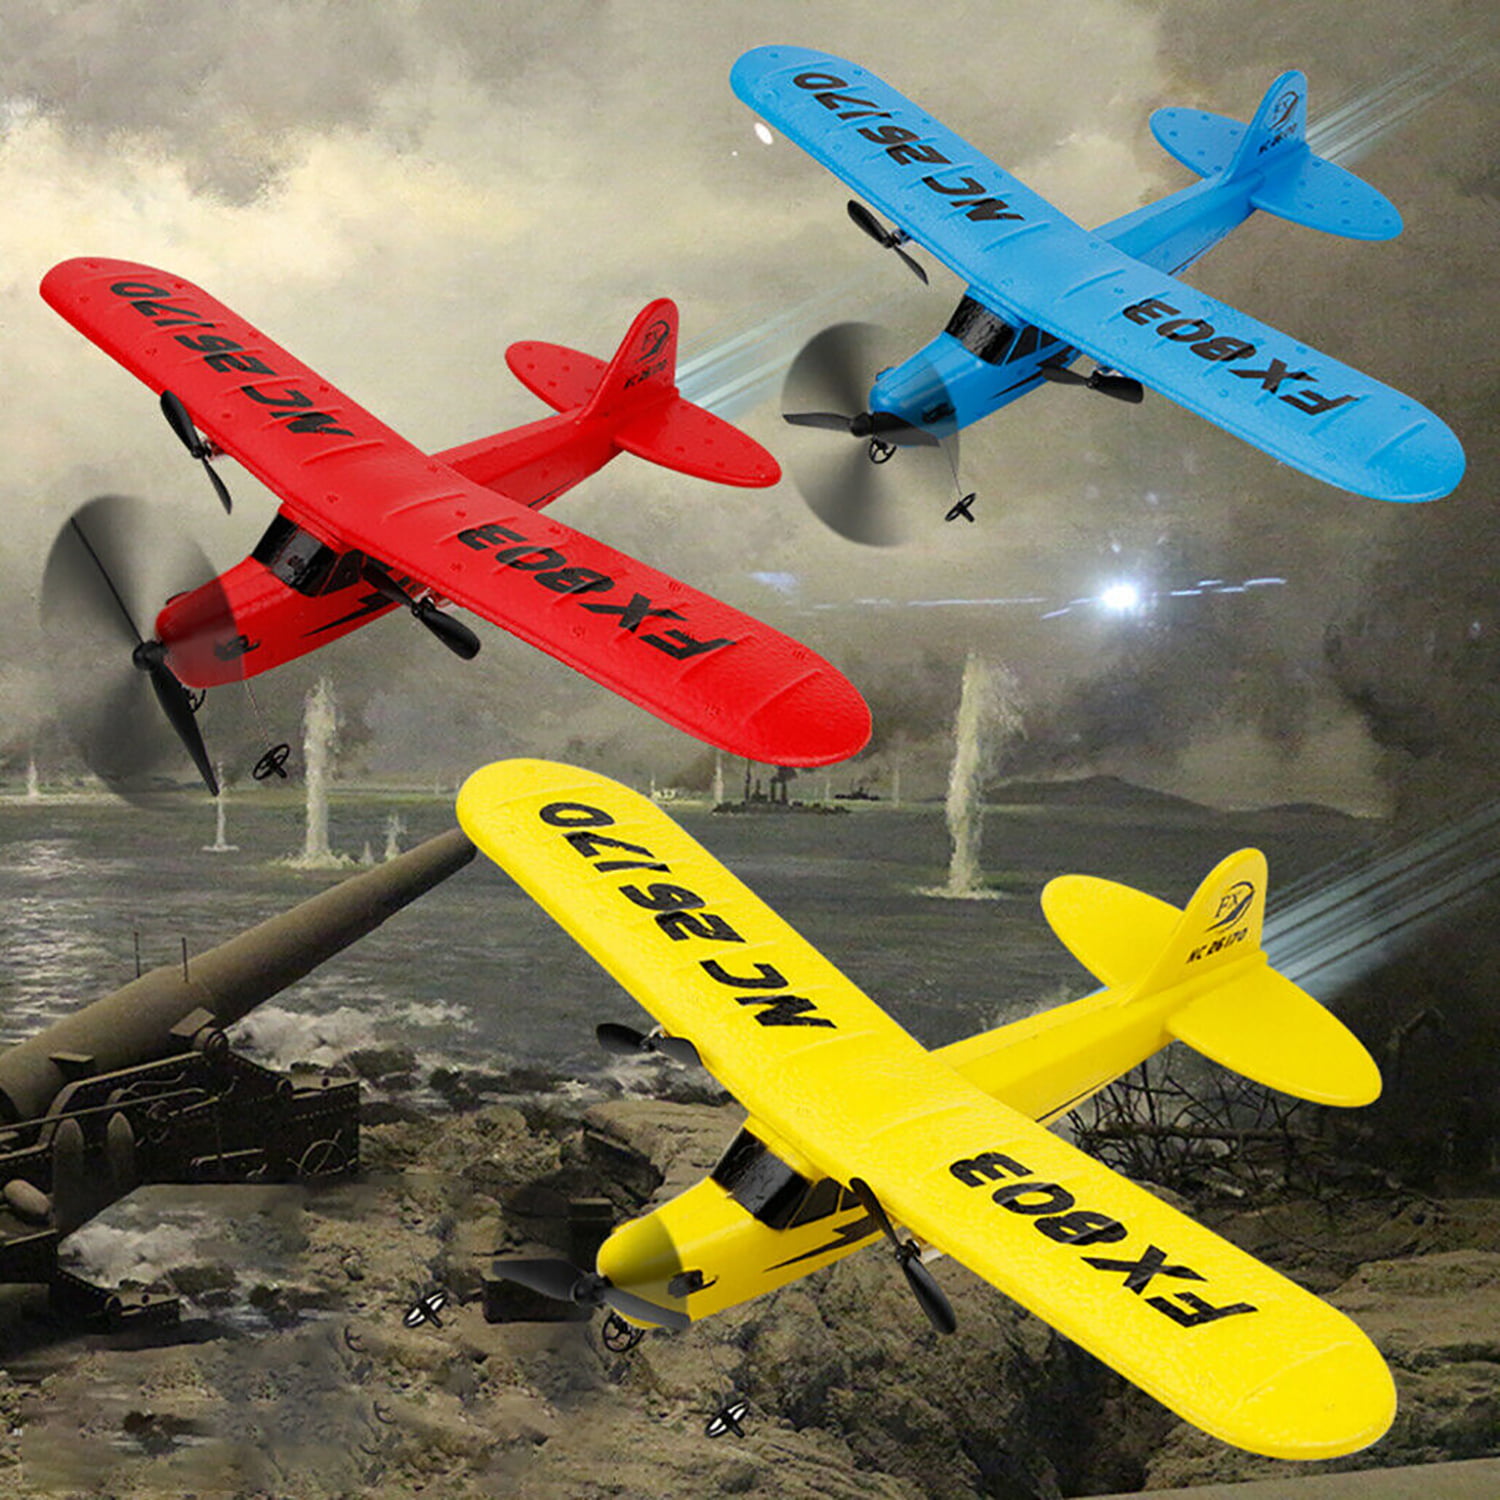 RC Plane 2.4Ghz 2 Channel Remote Control Airplane Ready to Fly A380 RC Aircraft for Kids Boys EPP Beginner Glider RC Aircraft Builted in 6-Axis Gyro 